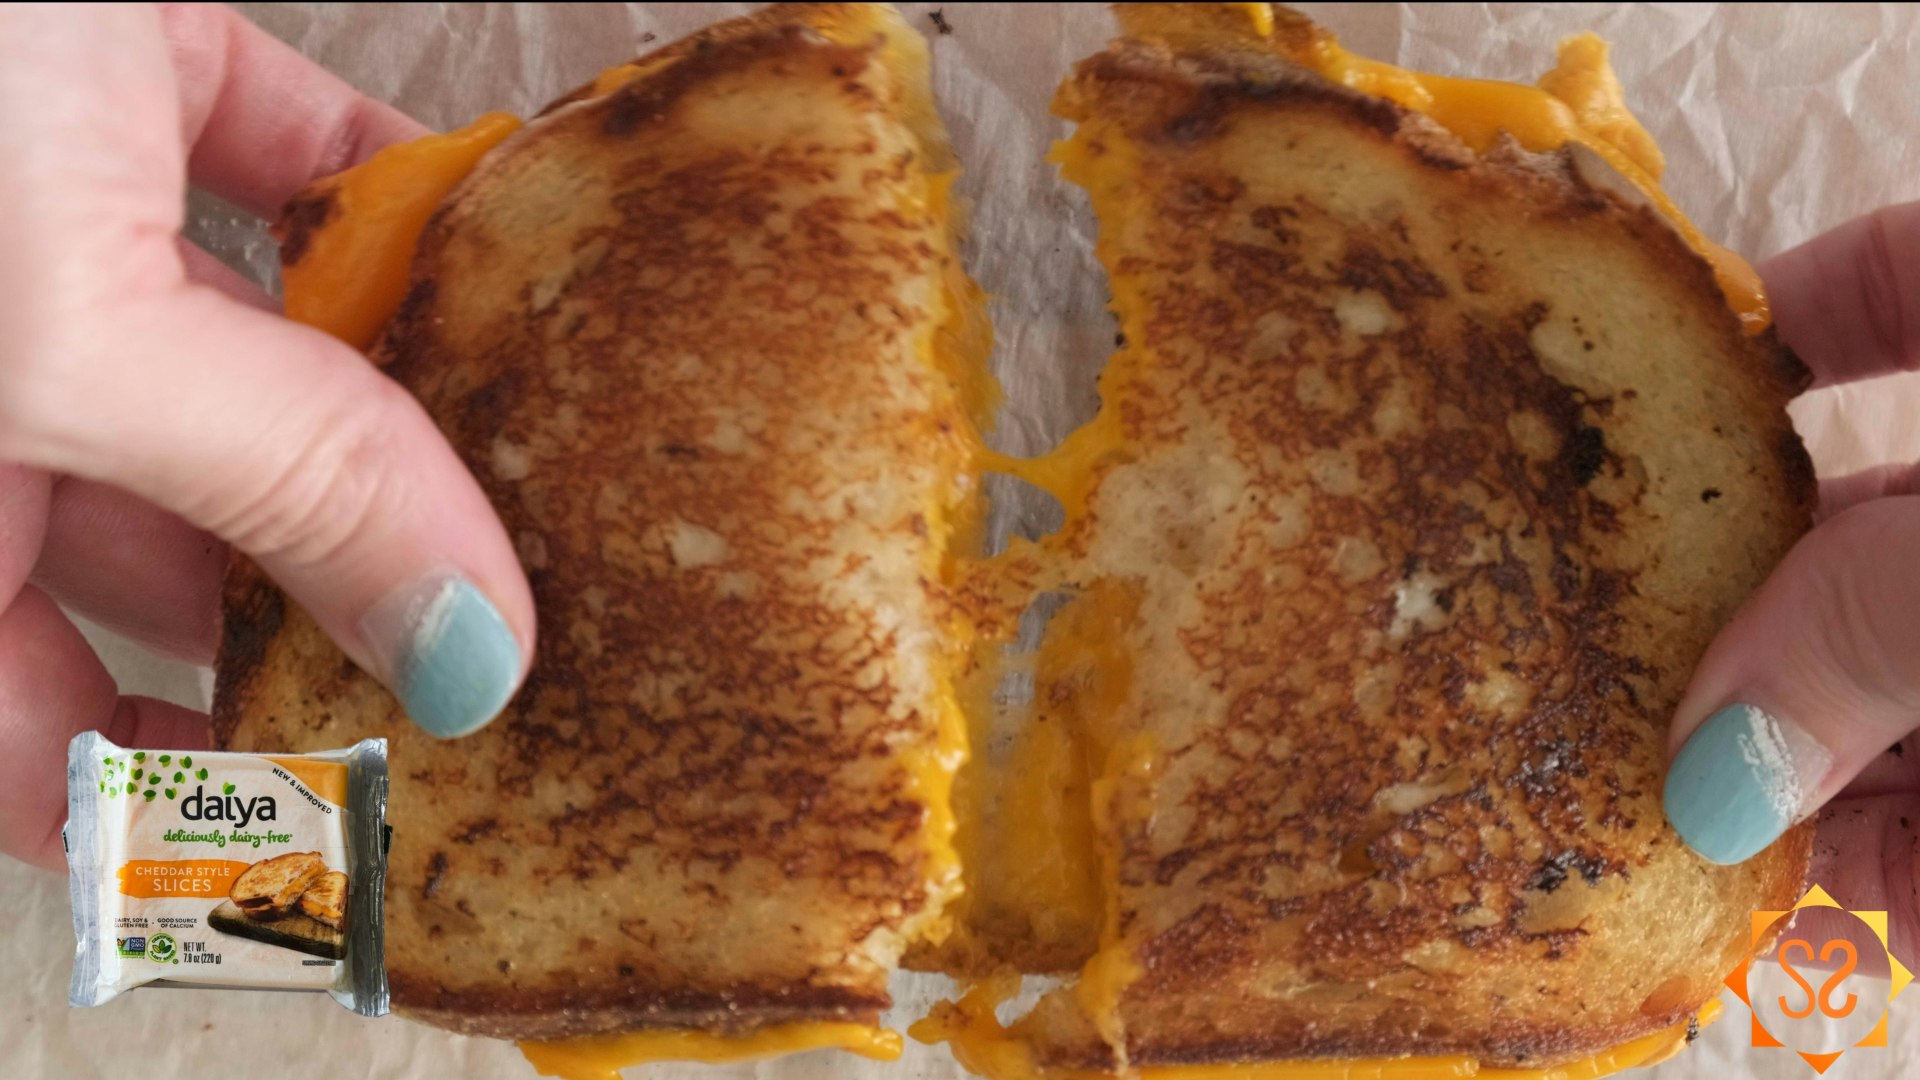 Hands pulling apart a grilled cheese sandwich made with Daiya cheddar